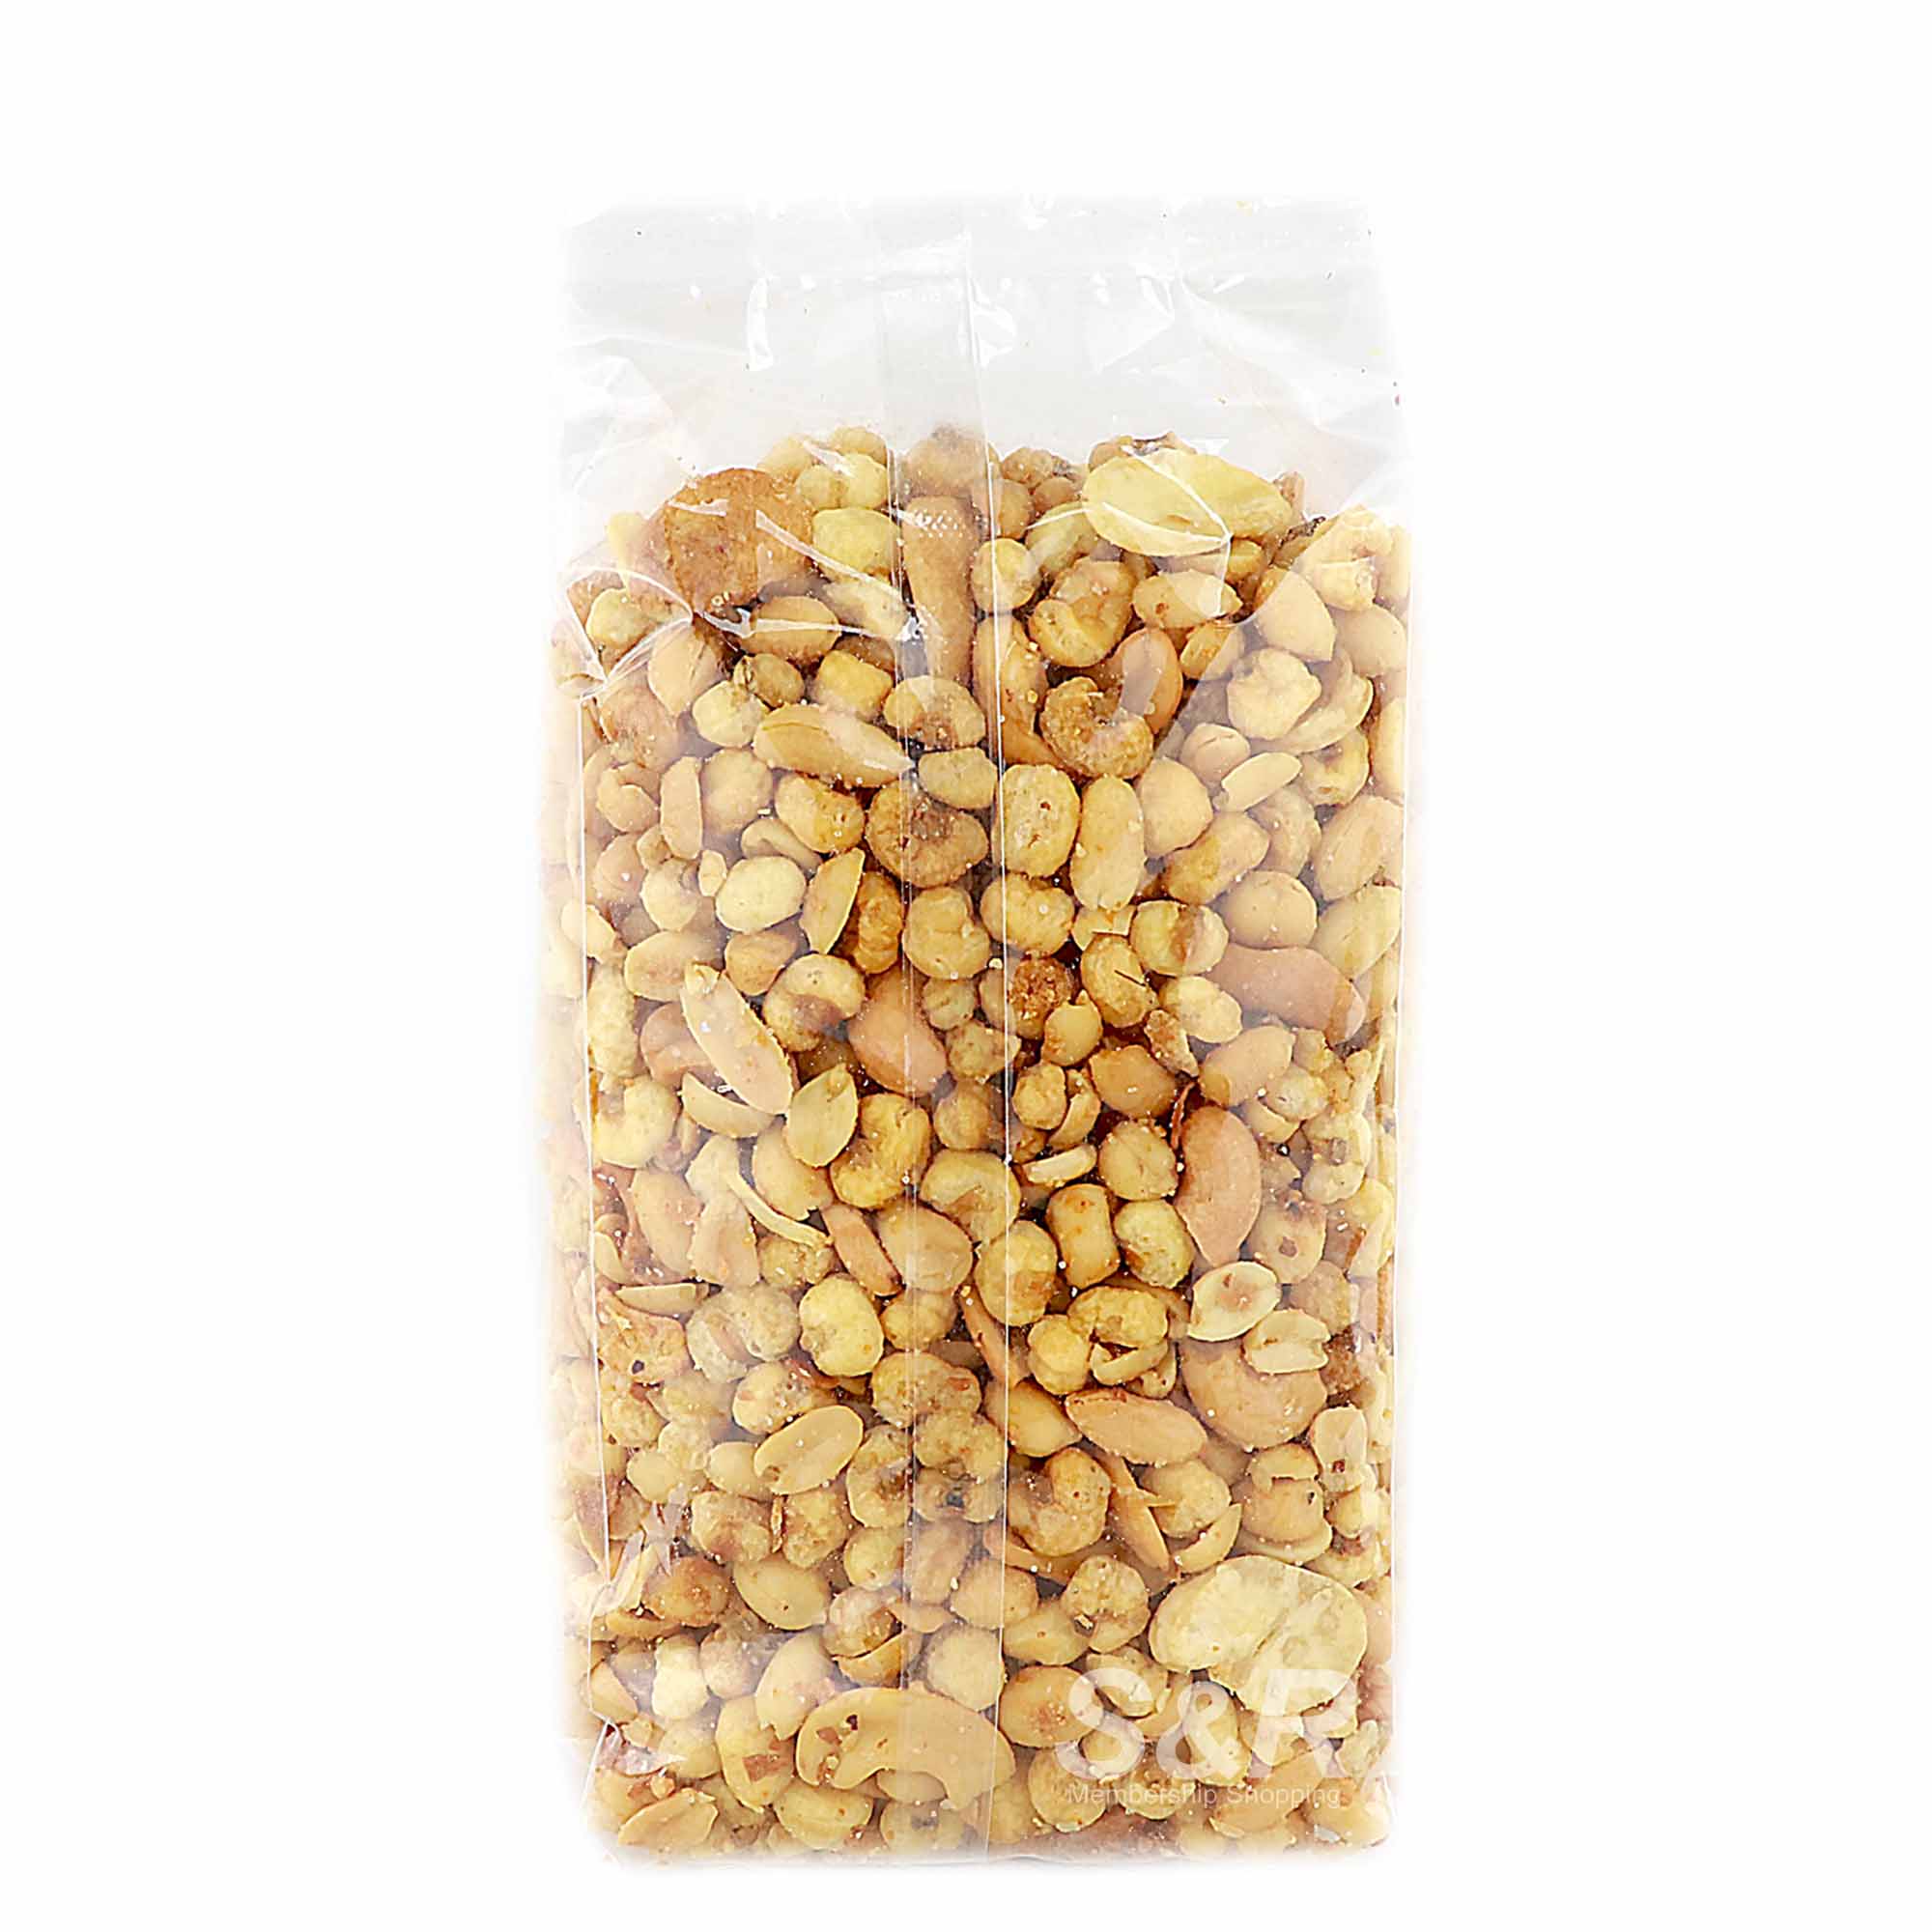 Supergarlic Mix Corn and Nuts